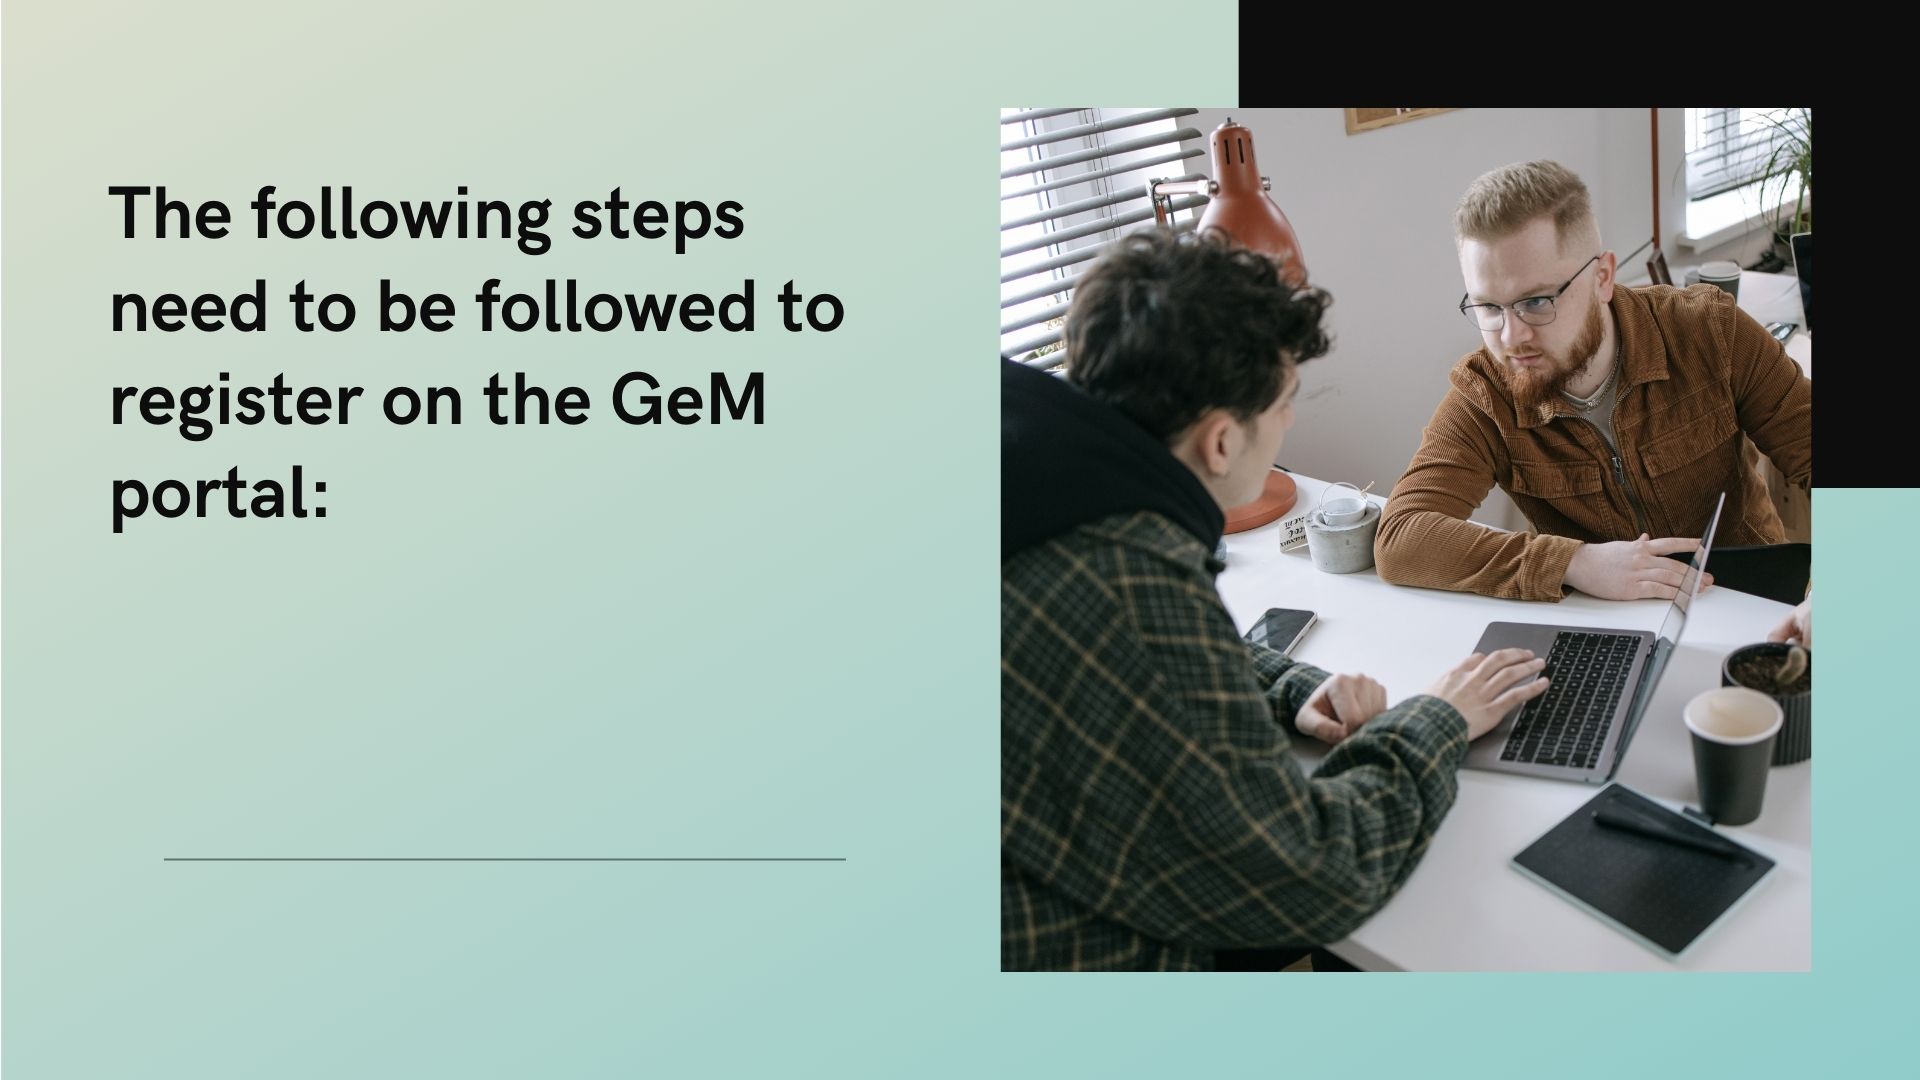 The following steps need to be followed to register on the GeM portal